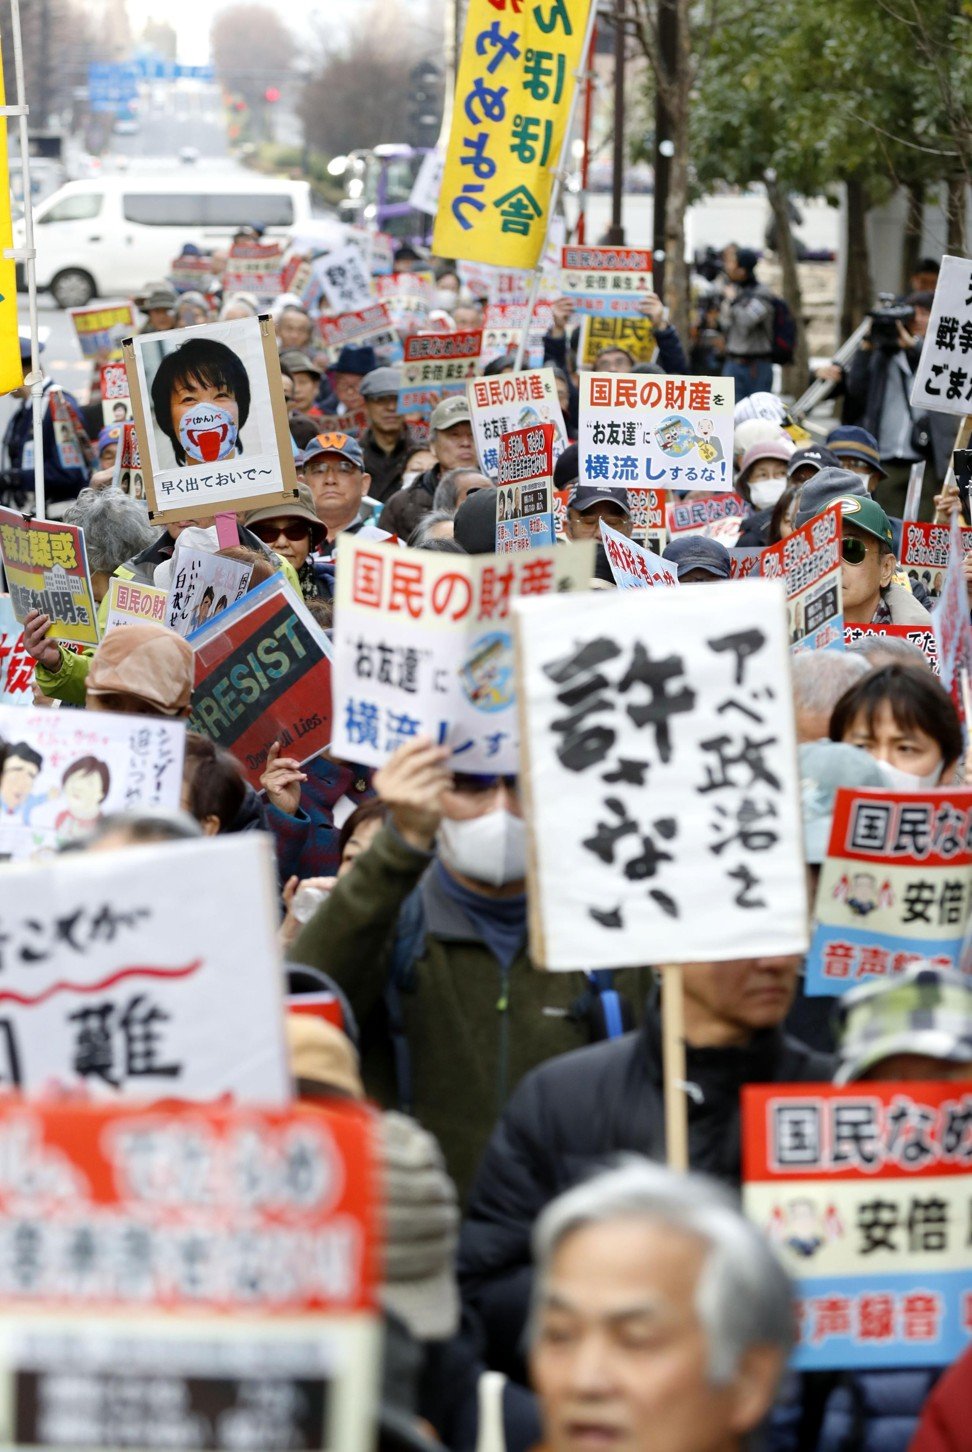 About 1,000 people protest in Tokyo against Prime Minister Shinzo Abe’s government amid an escalating scandal involving a questionable land sale in Osaka. Photo: Kyodo